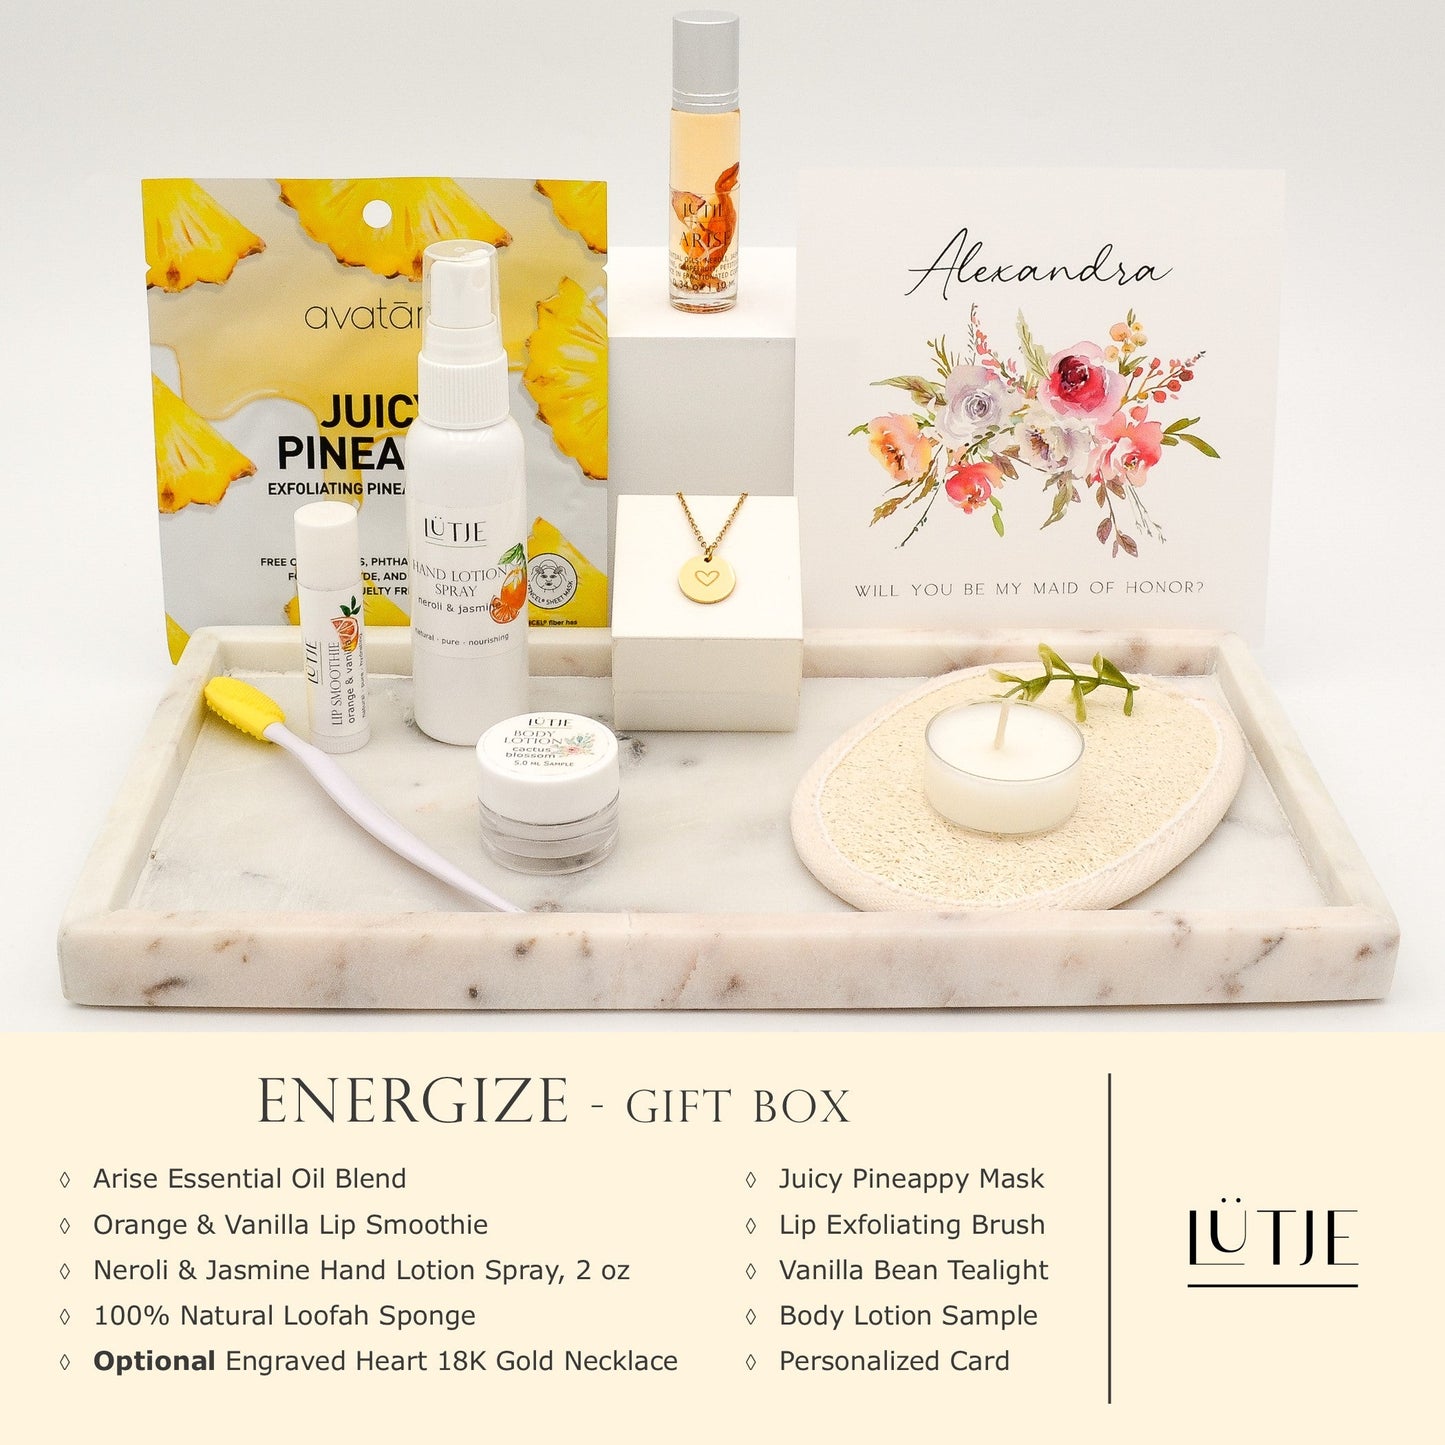 Energize Gift Box for women, BFF, wife, daughter, sister, mom, or grandma, includes Neroli & Jasmine hand lotion spray, essential oil, lip balm, hydrating face mask, other bath, spa and self-care items, and optional 18K gold-plated necklace with engraved heart.